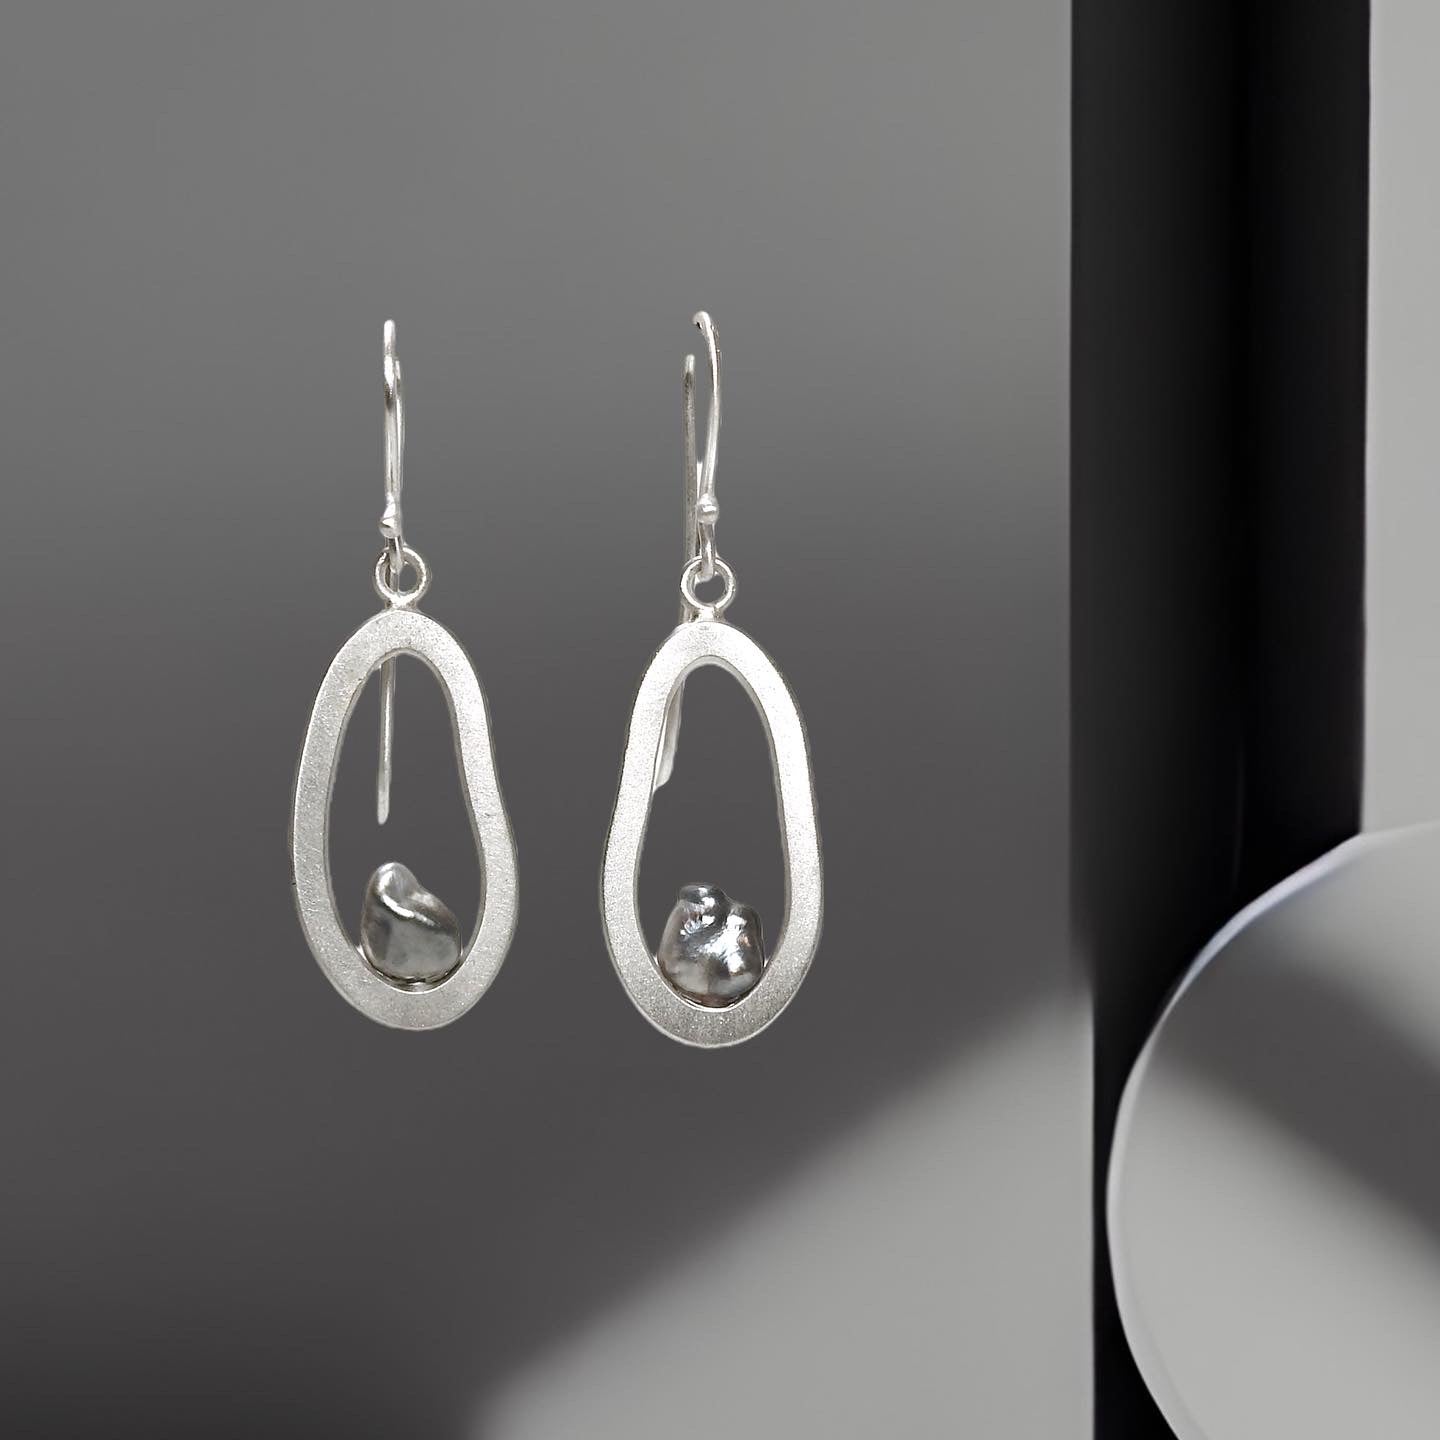 Soft pebble outline earrings in sterling silver with Tahitian keish pearls, by ZEALmetal, Nicole Horlor, in Kingston, ON, Canada